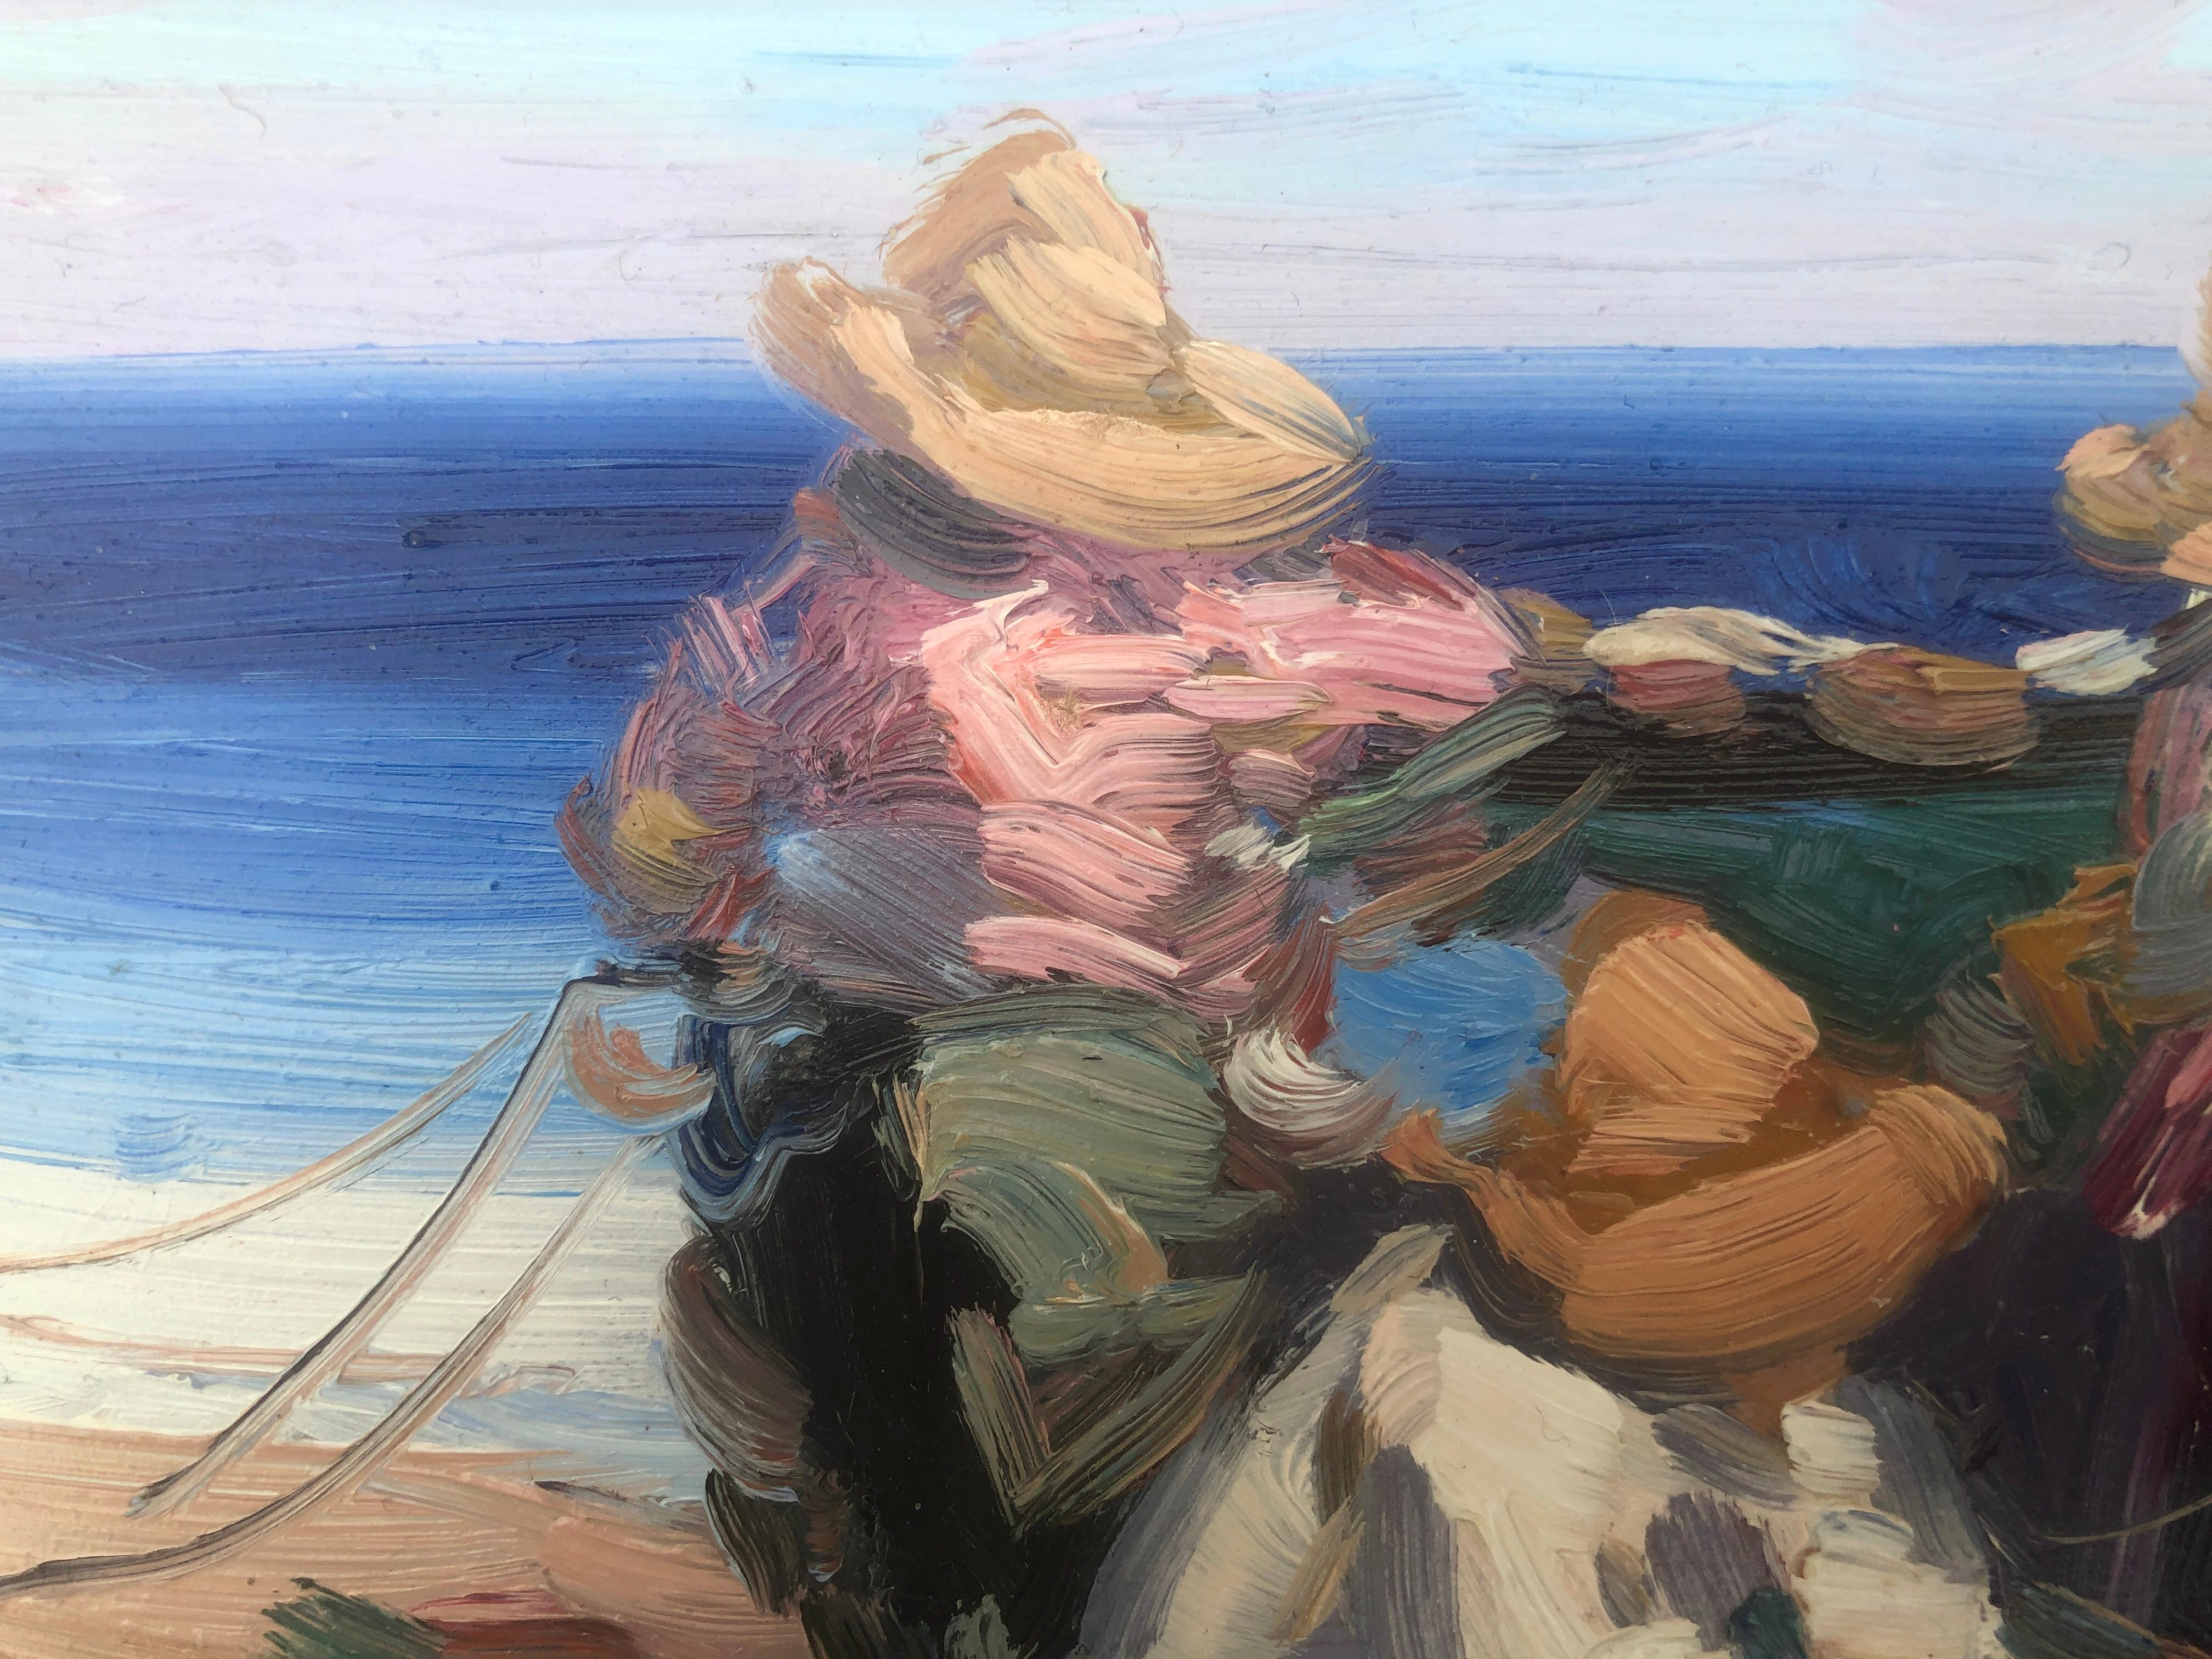 Spanish fishermen on the beach Spain oil on board painting - Gray Figurative Painting by Gabriel Casarrubios